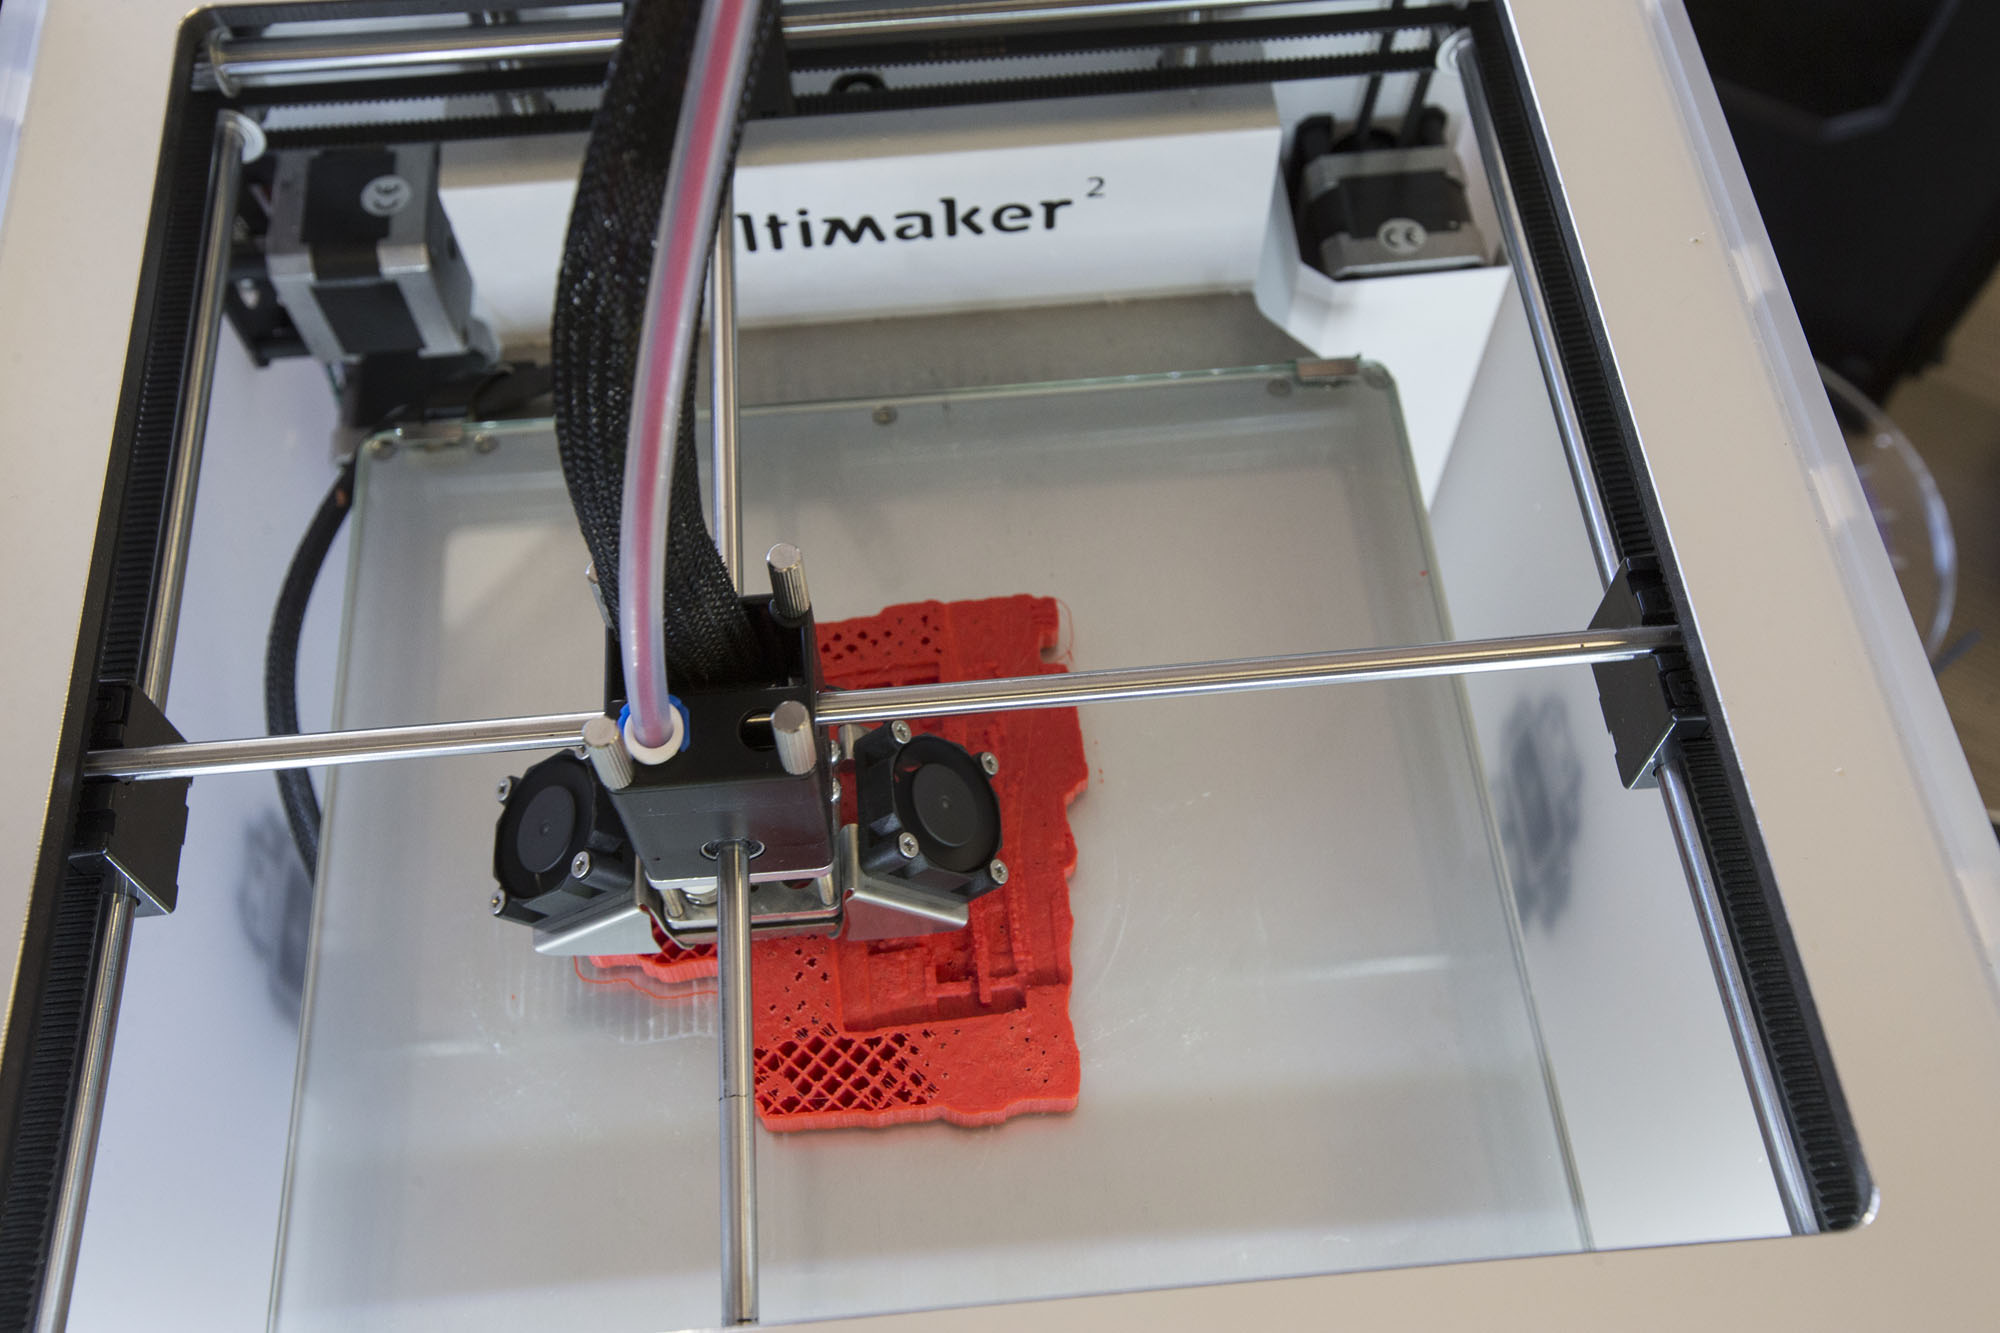 The Makerspace’s Ultimaker 3-D printer creates a detailed miniature of the Morgantina dig site in Sicily.